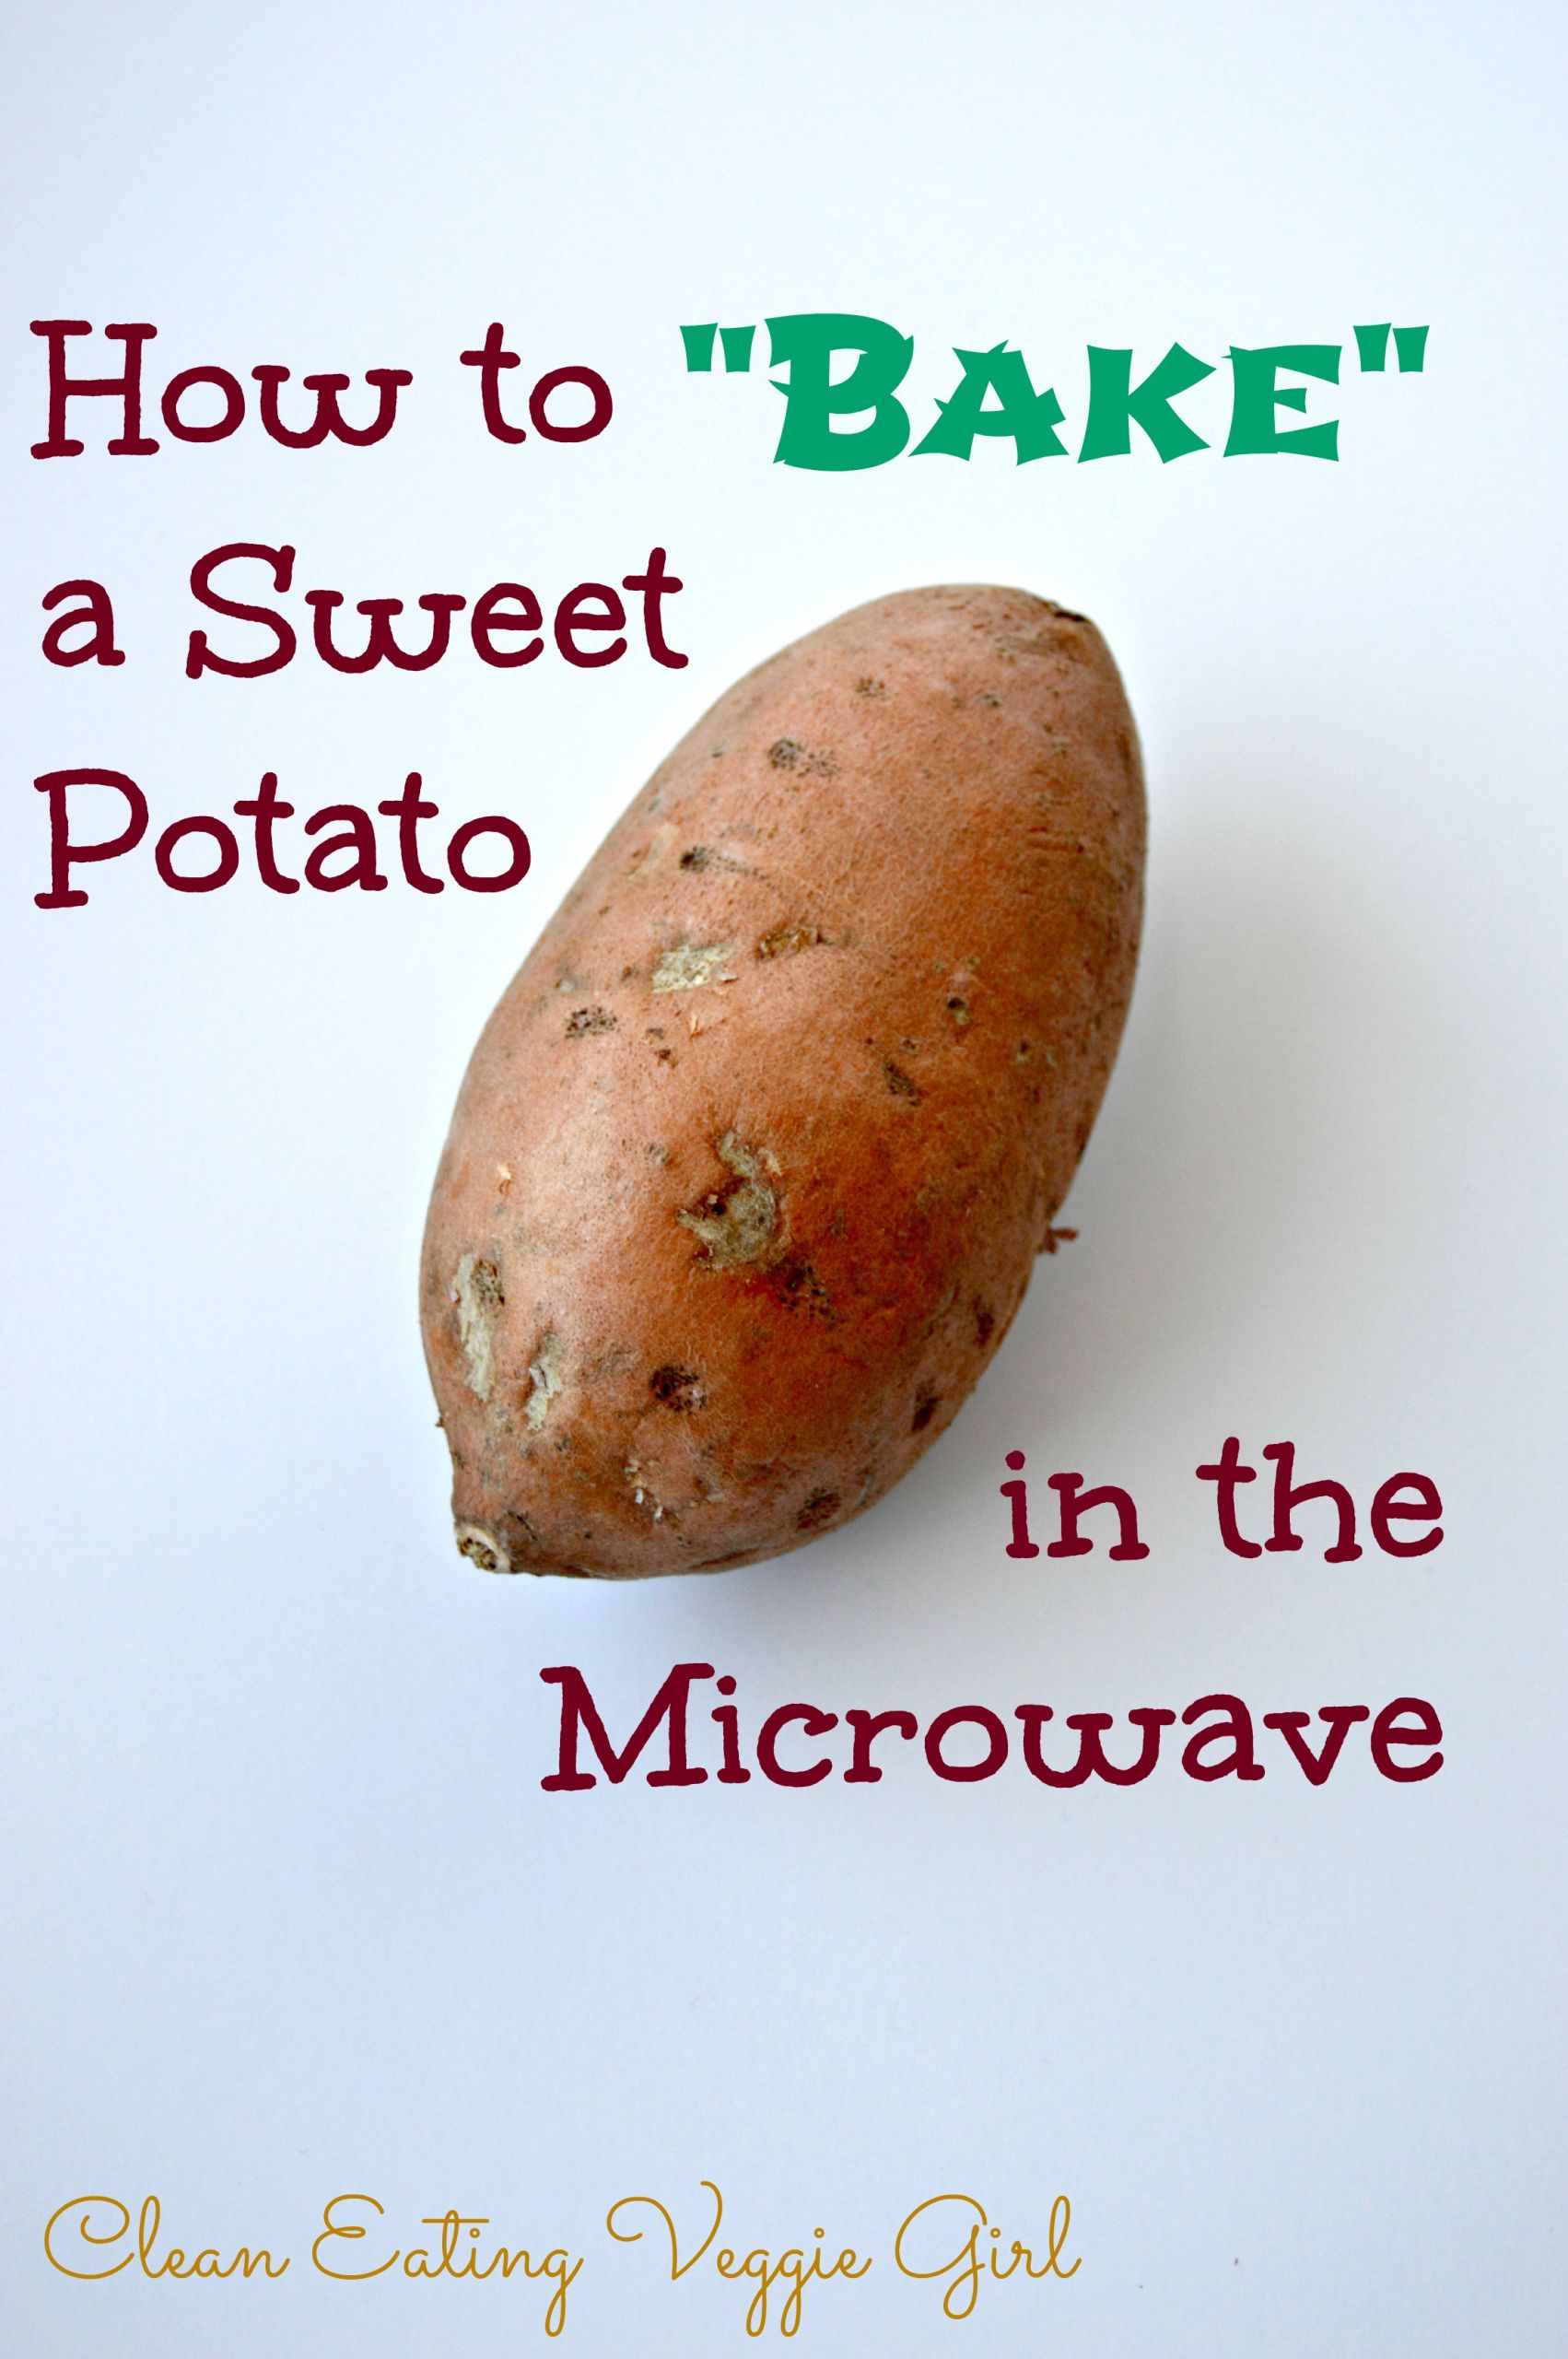 Potato In Microwave
 How to Make a Baked Sweet Potato in the Microwave Clean